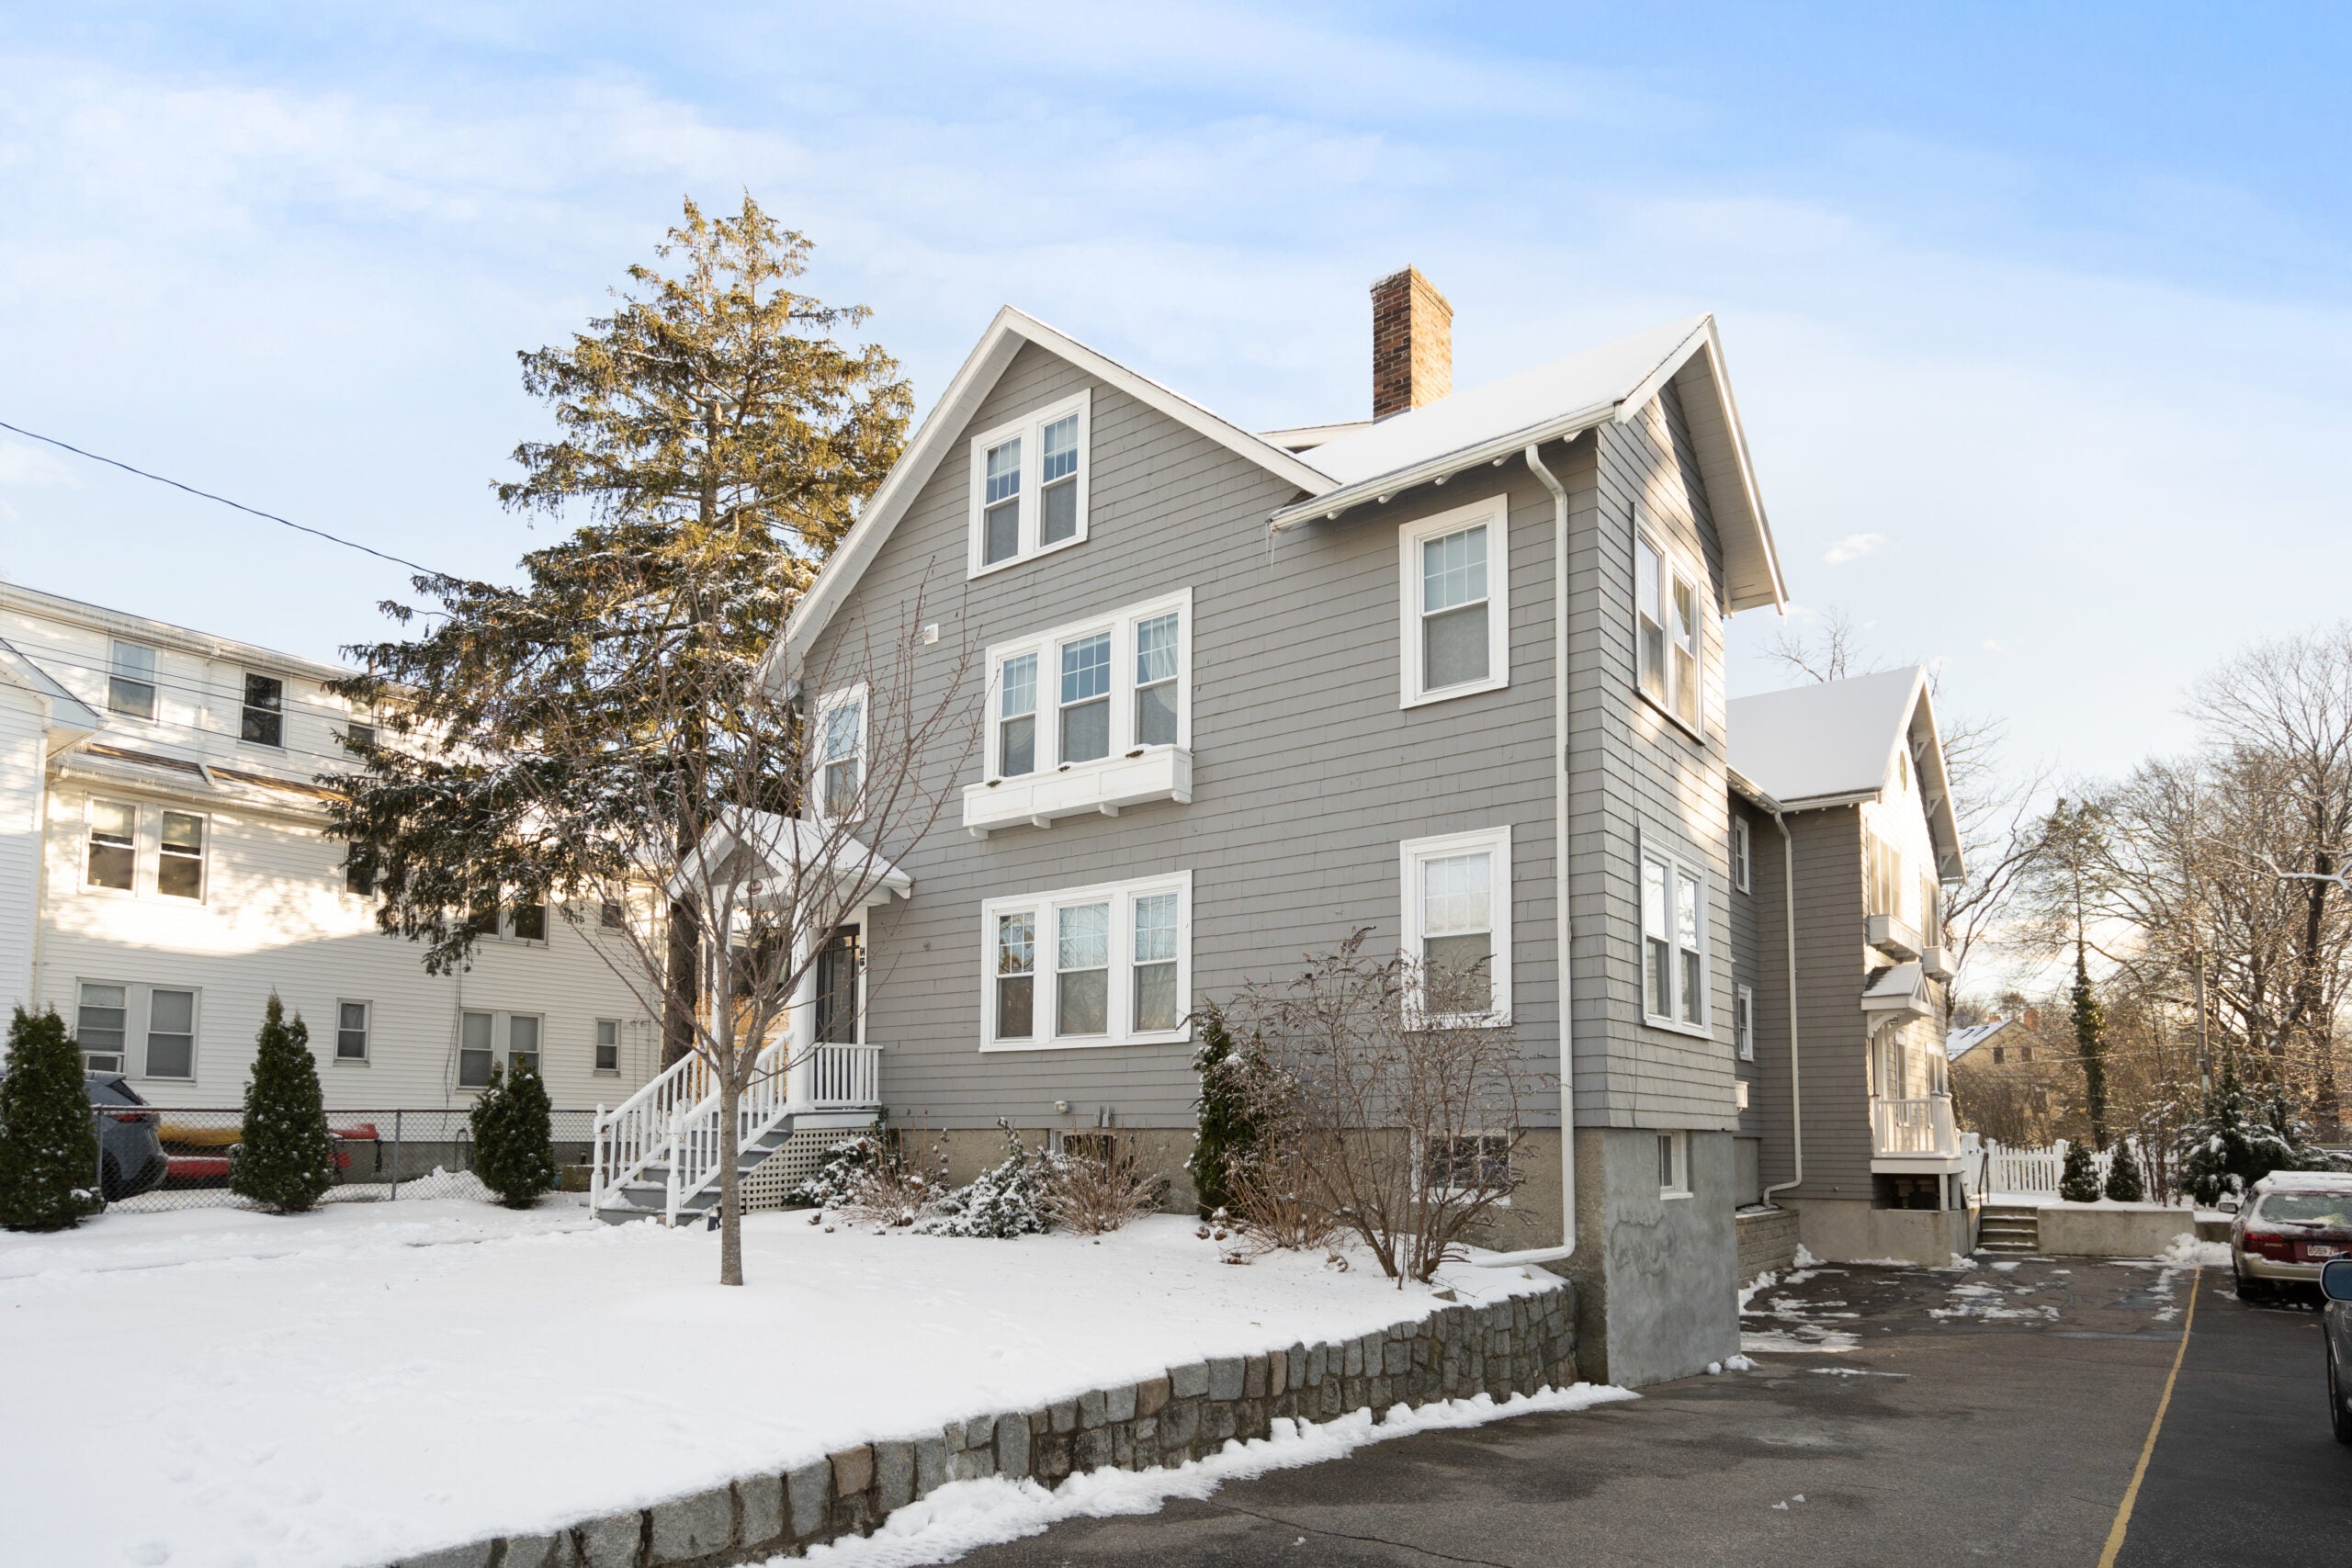 A gray multifamily home in Newton with white trim, 12 windows, a lone tree out front, snow on the group, blue skies, and a driveway running front to back in the foreground.